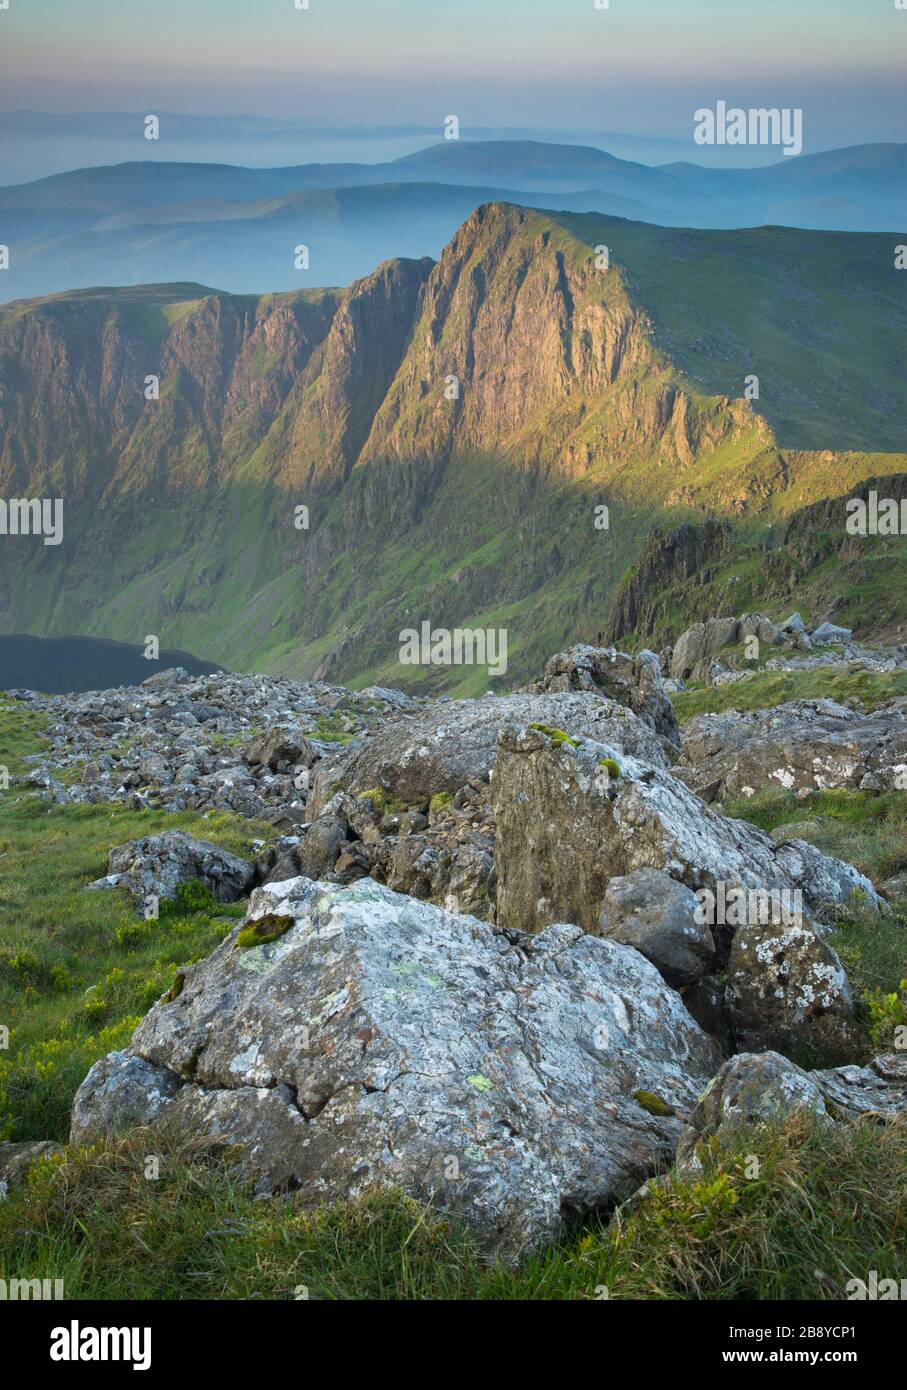 Wide views in lovely warm light near the summit of Cadair Idris, a high mountain near Dolgellau in North Wales, UK. Stock Photo